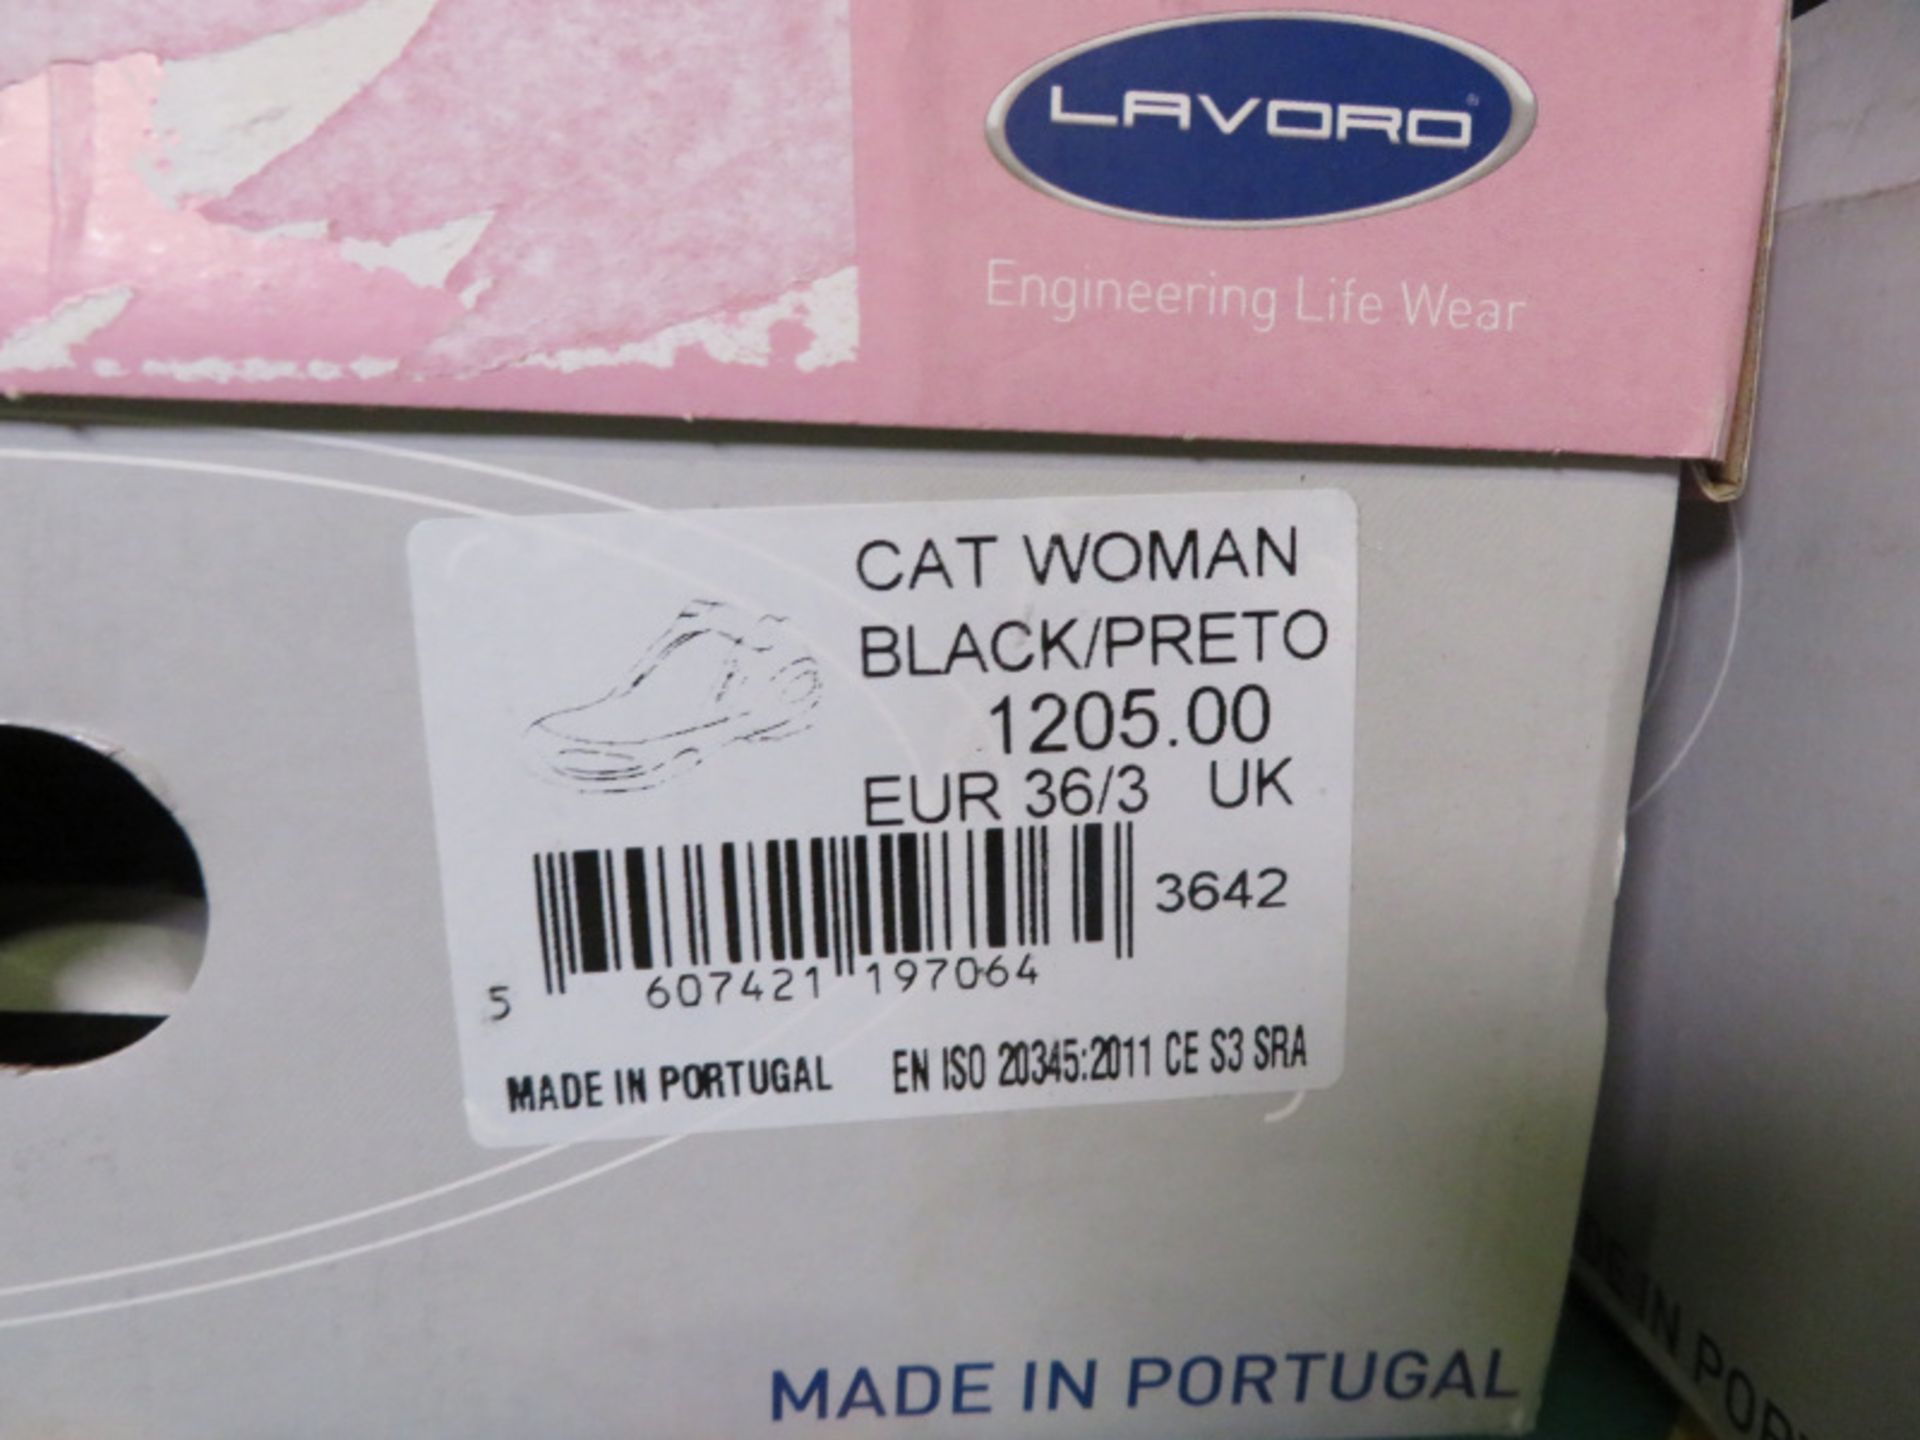 Lavoro womens safety shoes - see pictures for types & size - Image 5 of 7